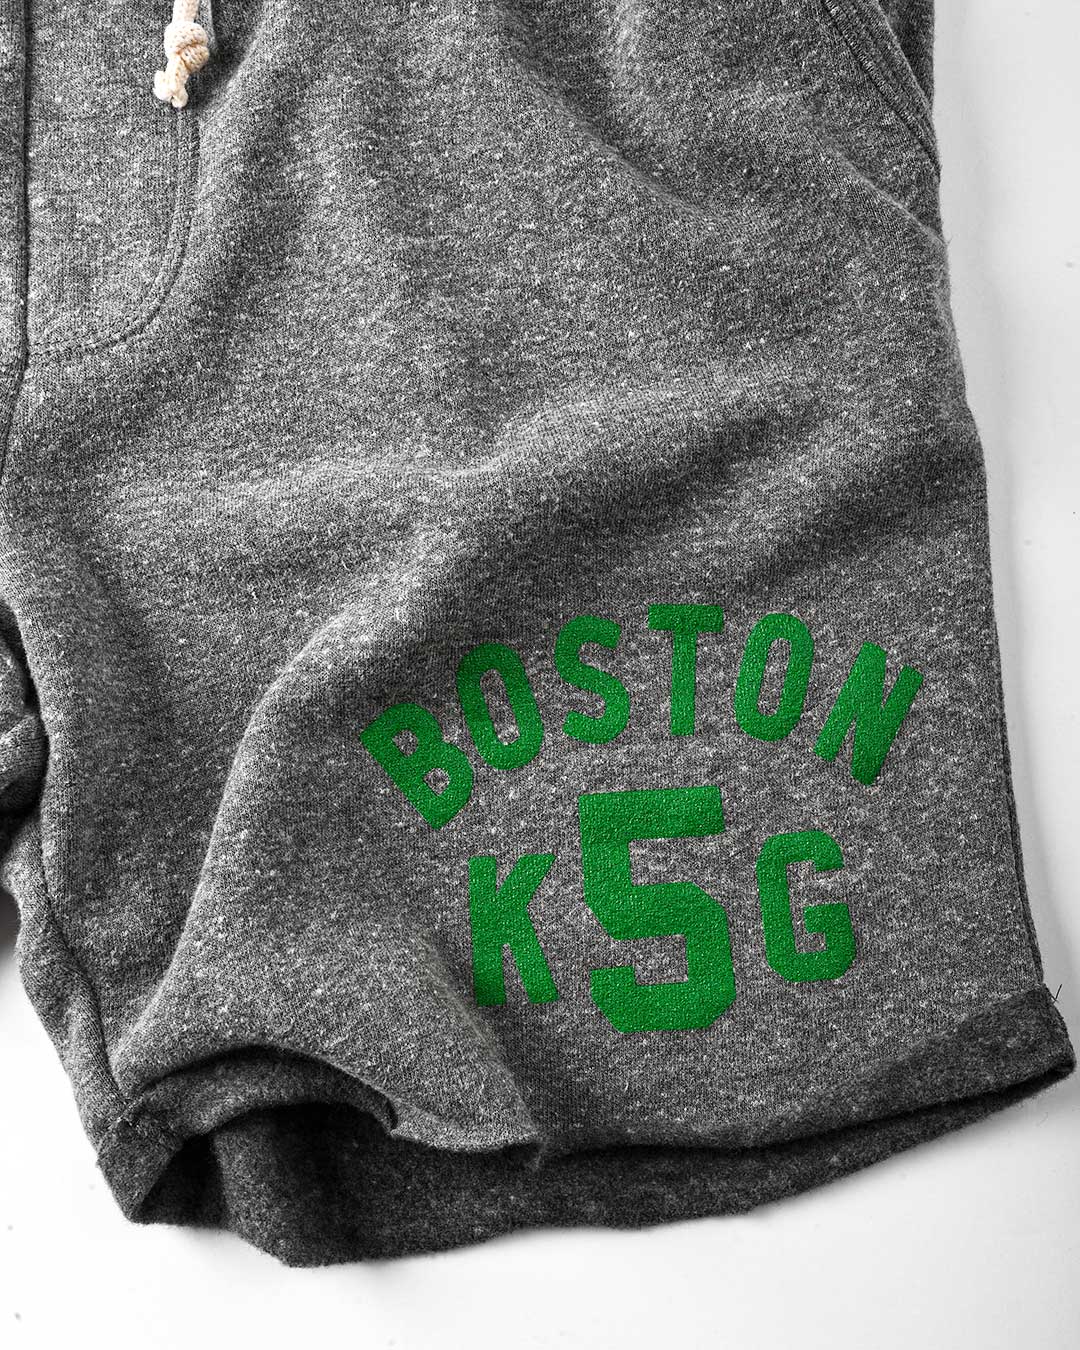 KG #5 Boston Grey Shorts - Roots of Fight